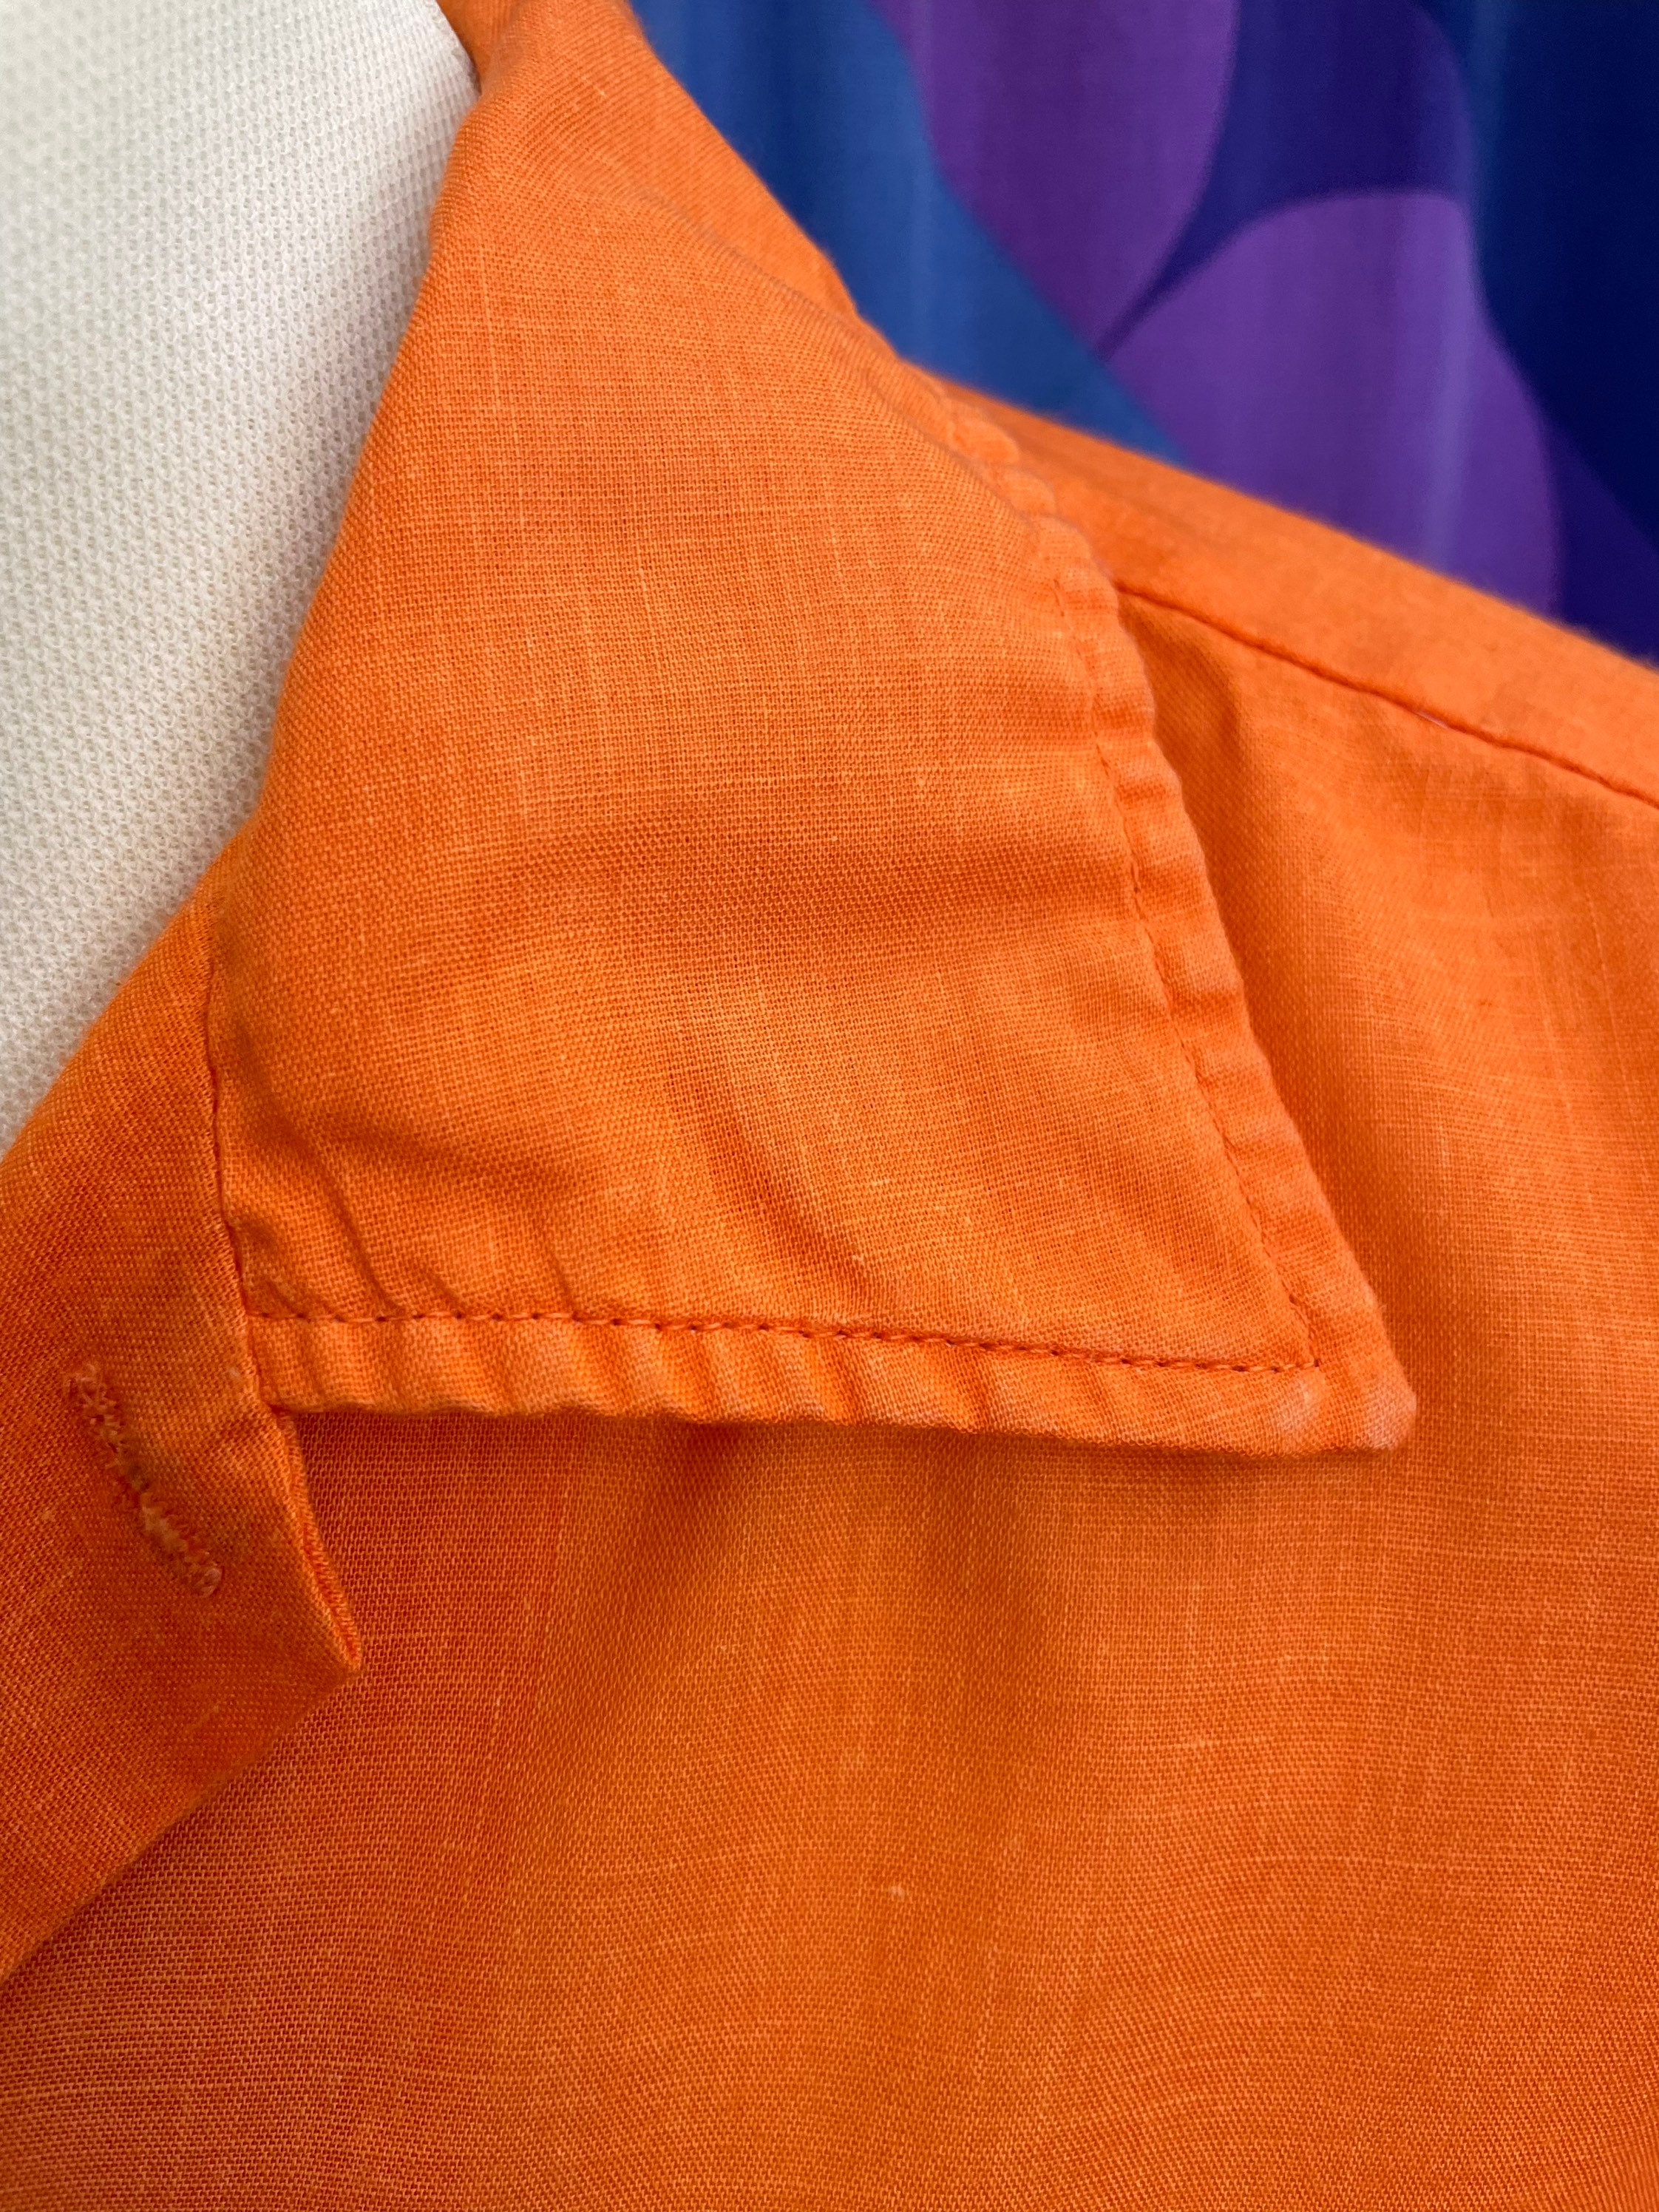 Amazing 60s Bright Orange Short Sleeved Button Front Bowling | Etsy